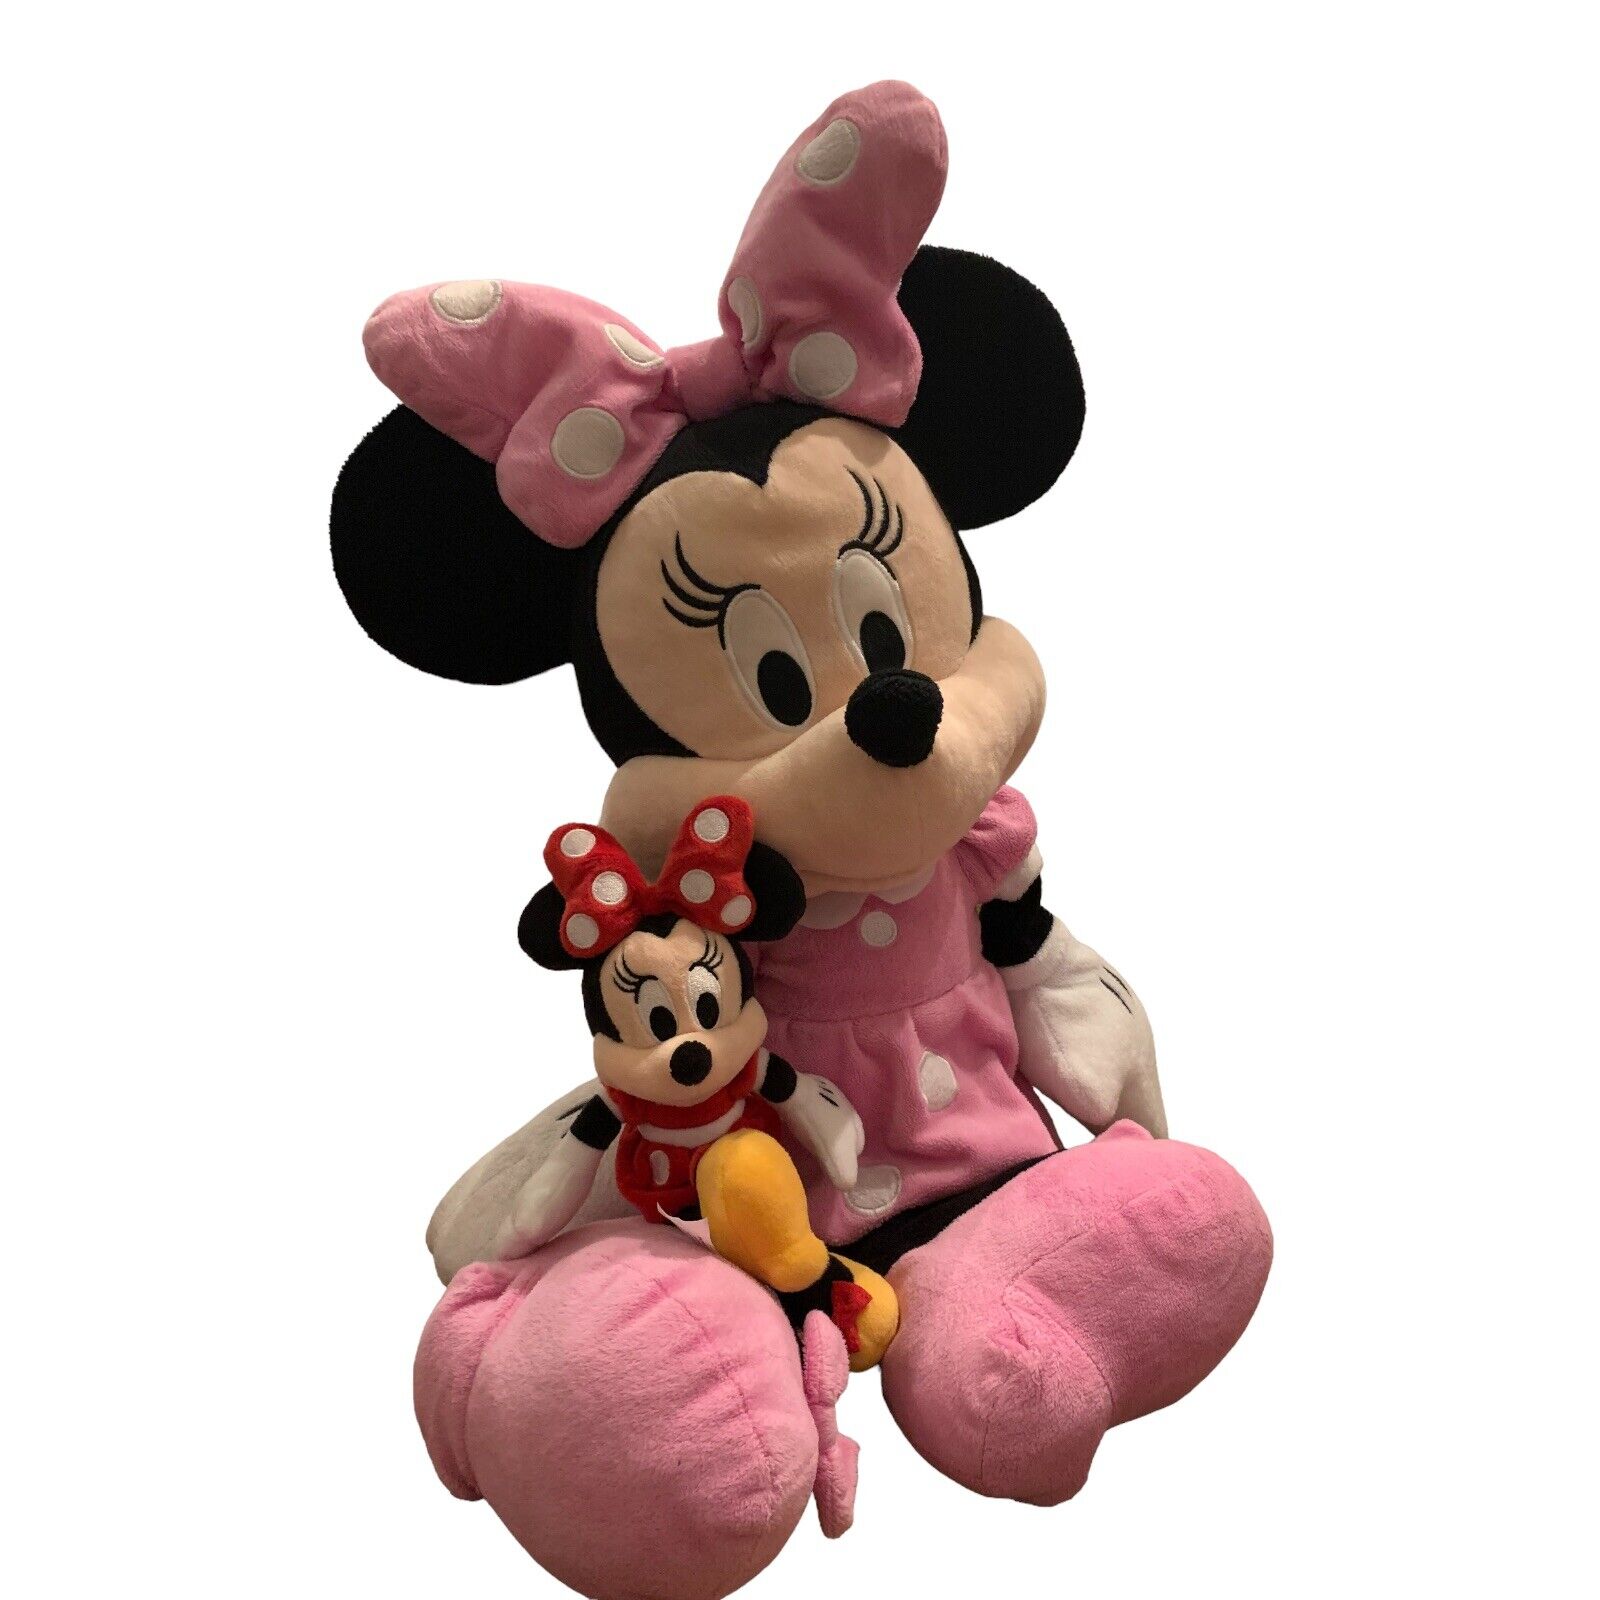 2 Plush Minnie Mouse Dolls, Red Mini Bean Bag 9 1/2\'\', Pink With Bow Jumbo 25”